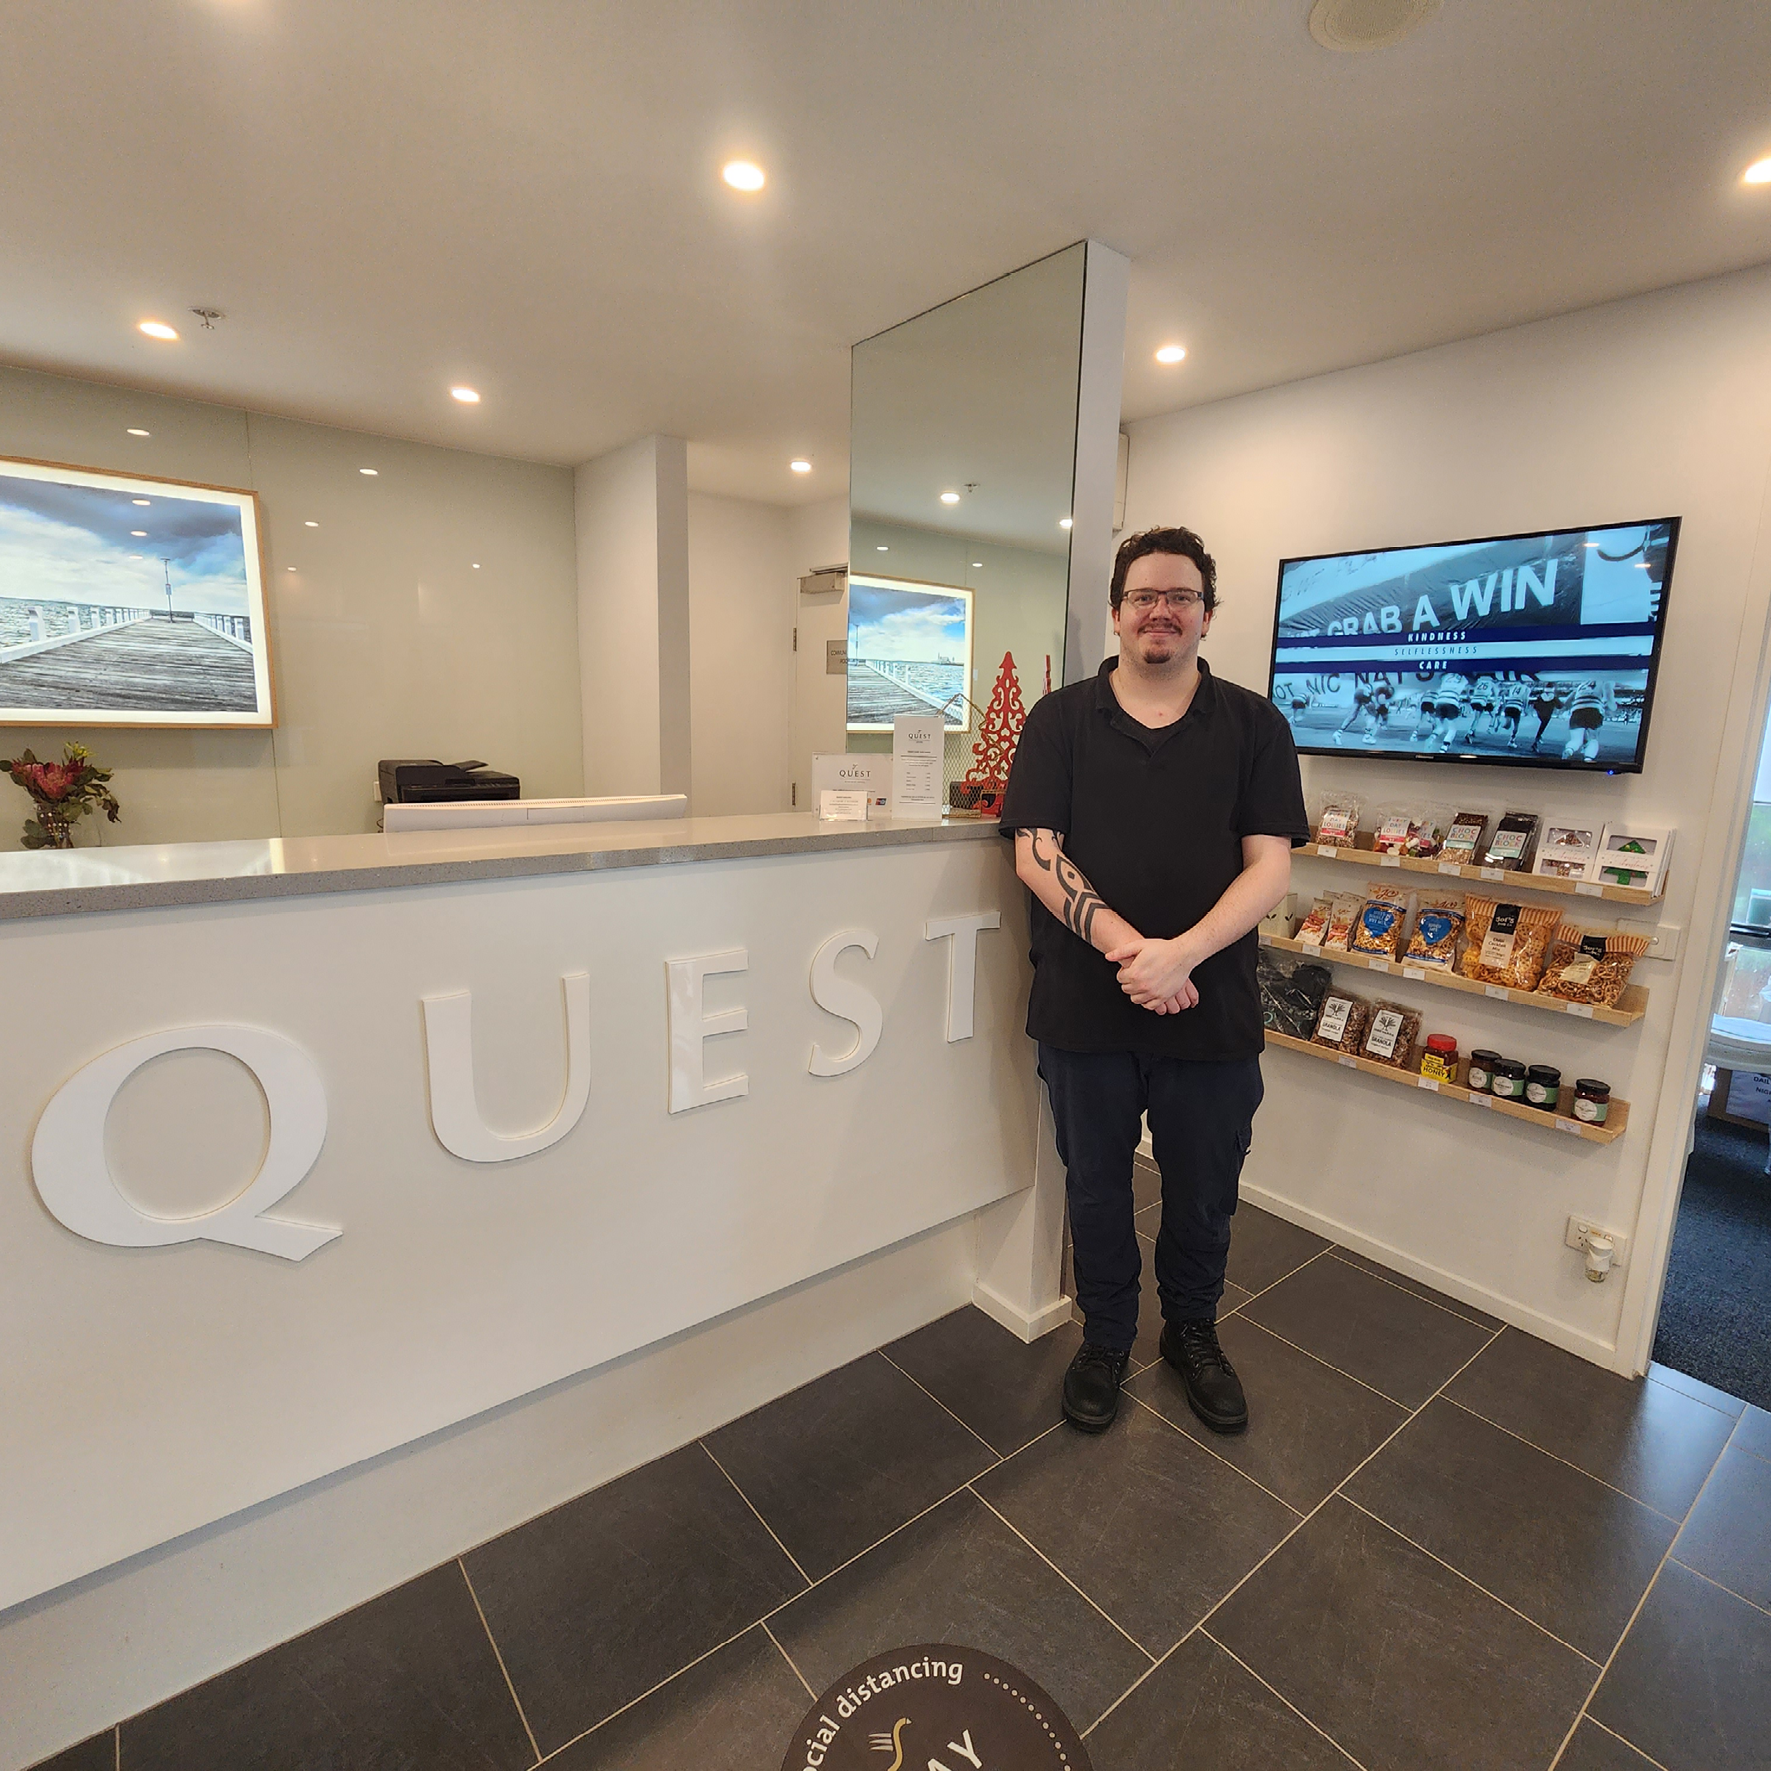 Nick finds Quest Hotels has the supportive culture he needs to reach his goals